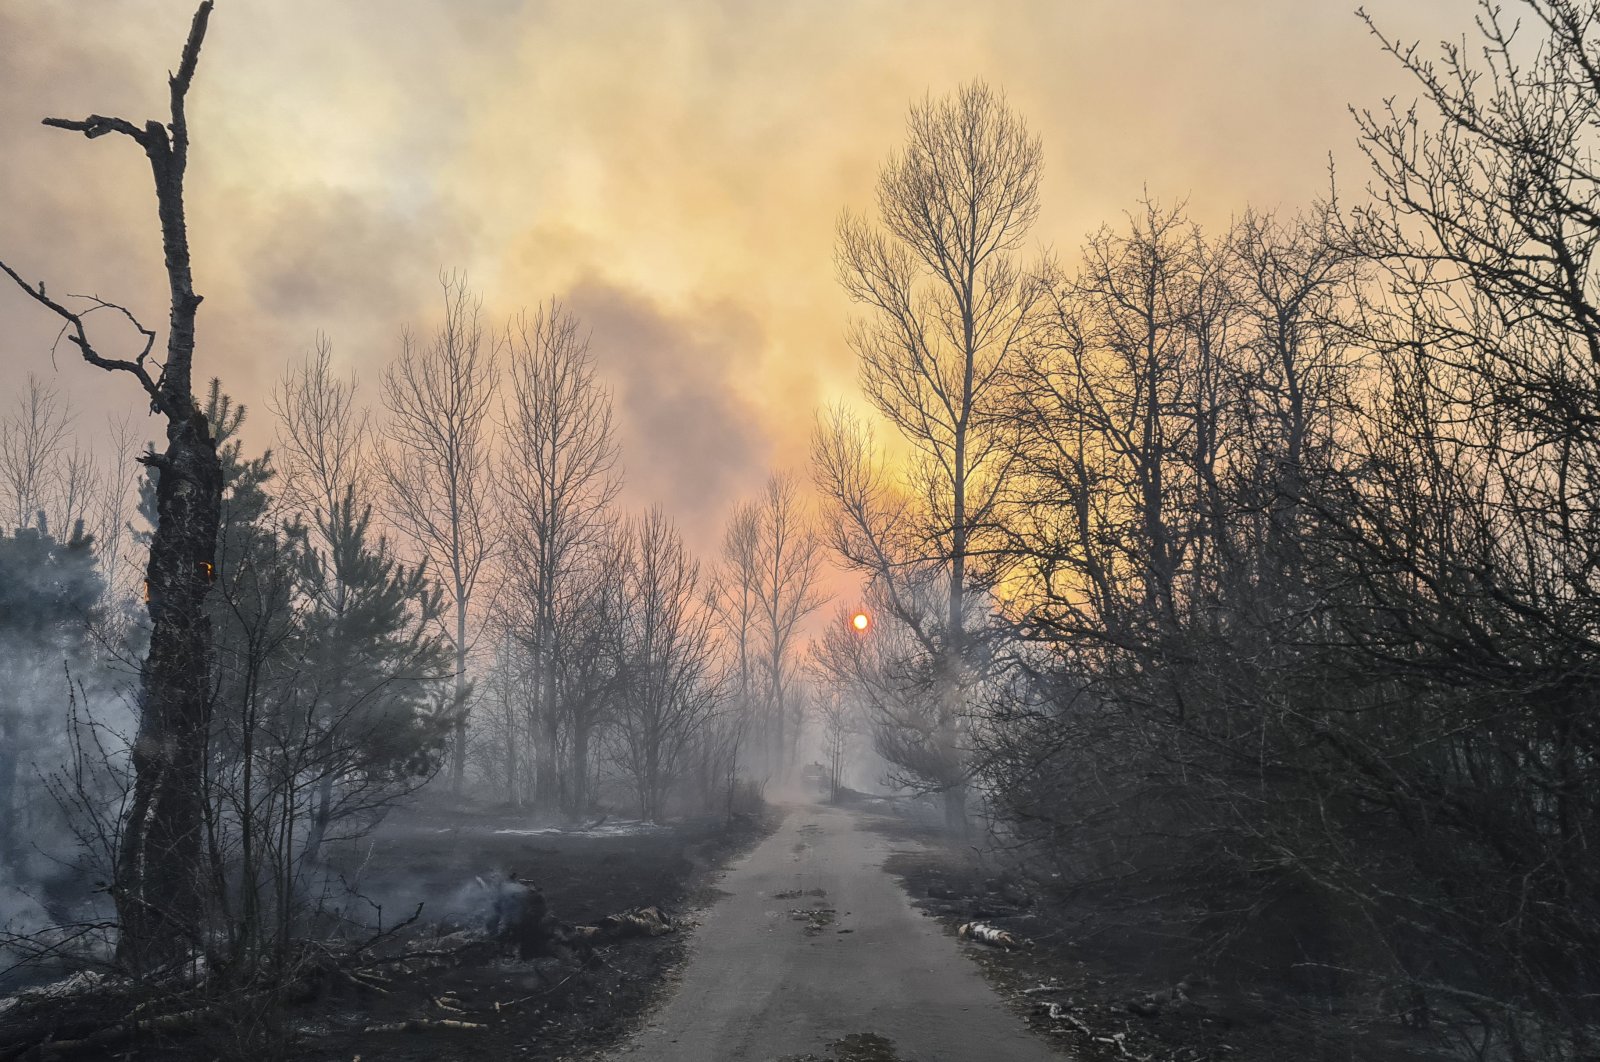 A forest fire burns near the village of Volodymyrivka, in the exclusion zone around the Chernobyl nuclear power plant, Ukraine, April 5, 2020. (EPA Photo)